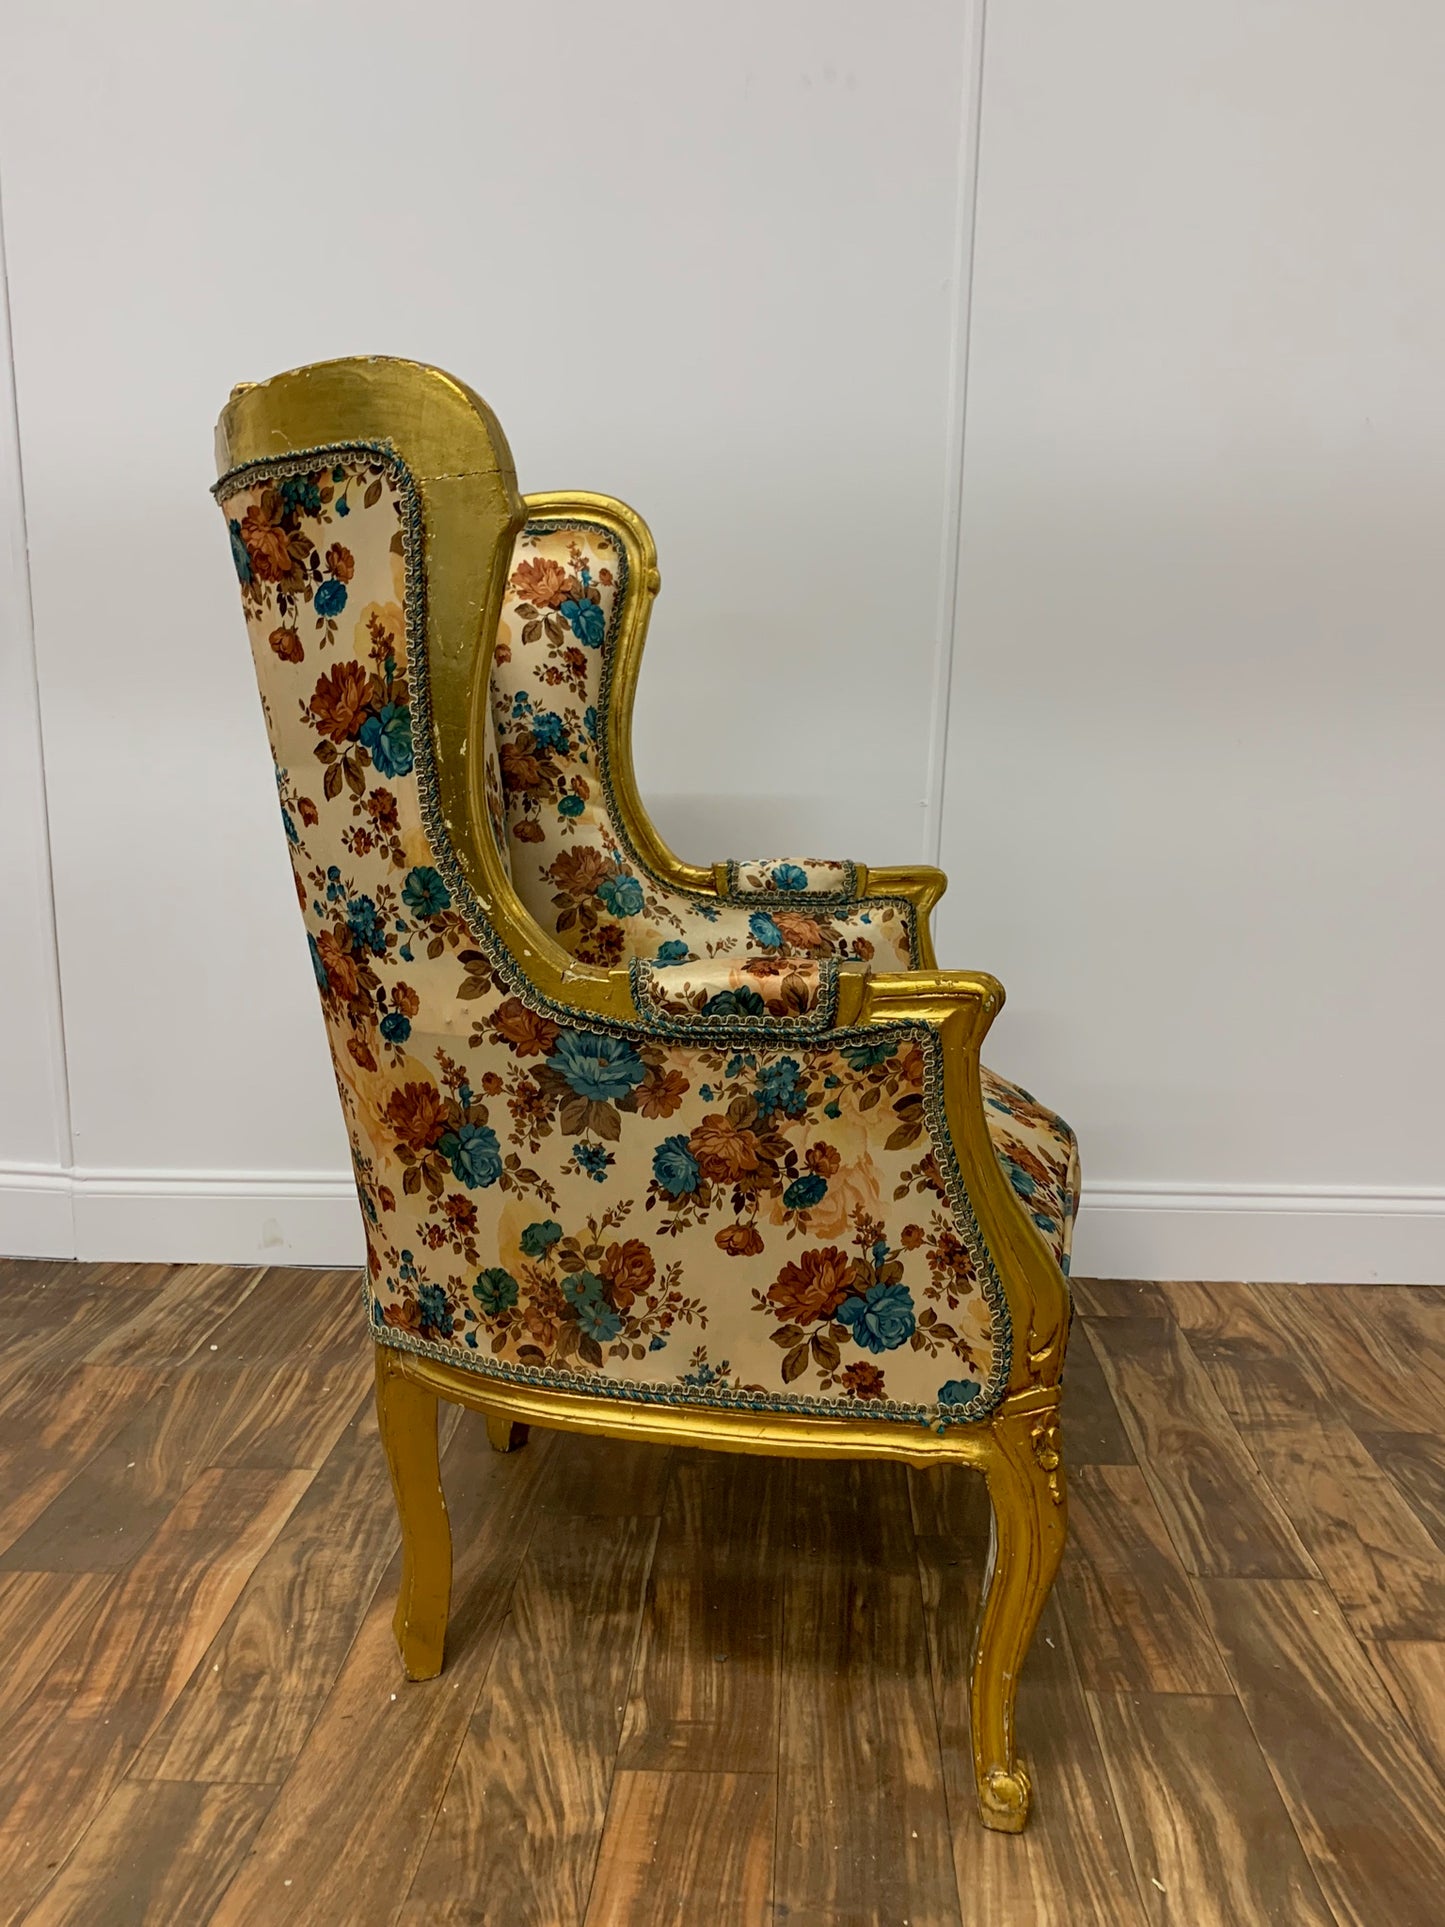 ORNATE FLORAL PATTERN WINGBACK CHAIR